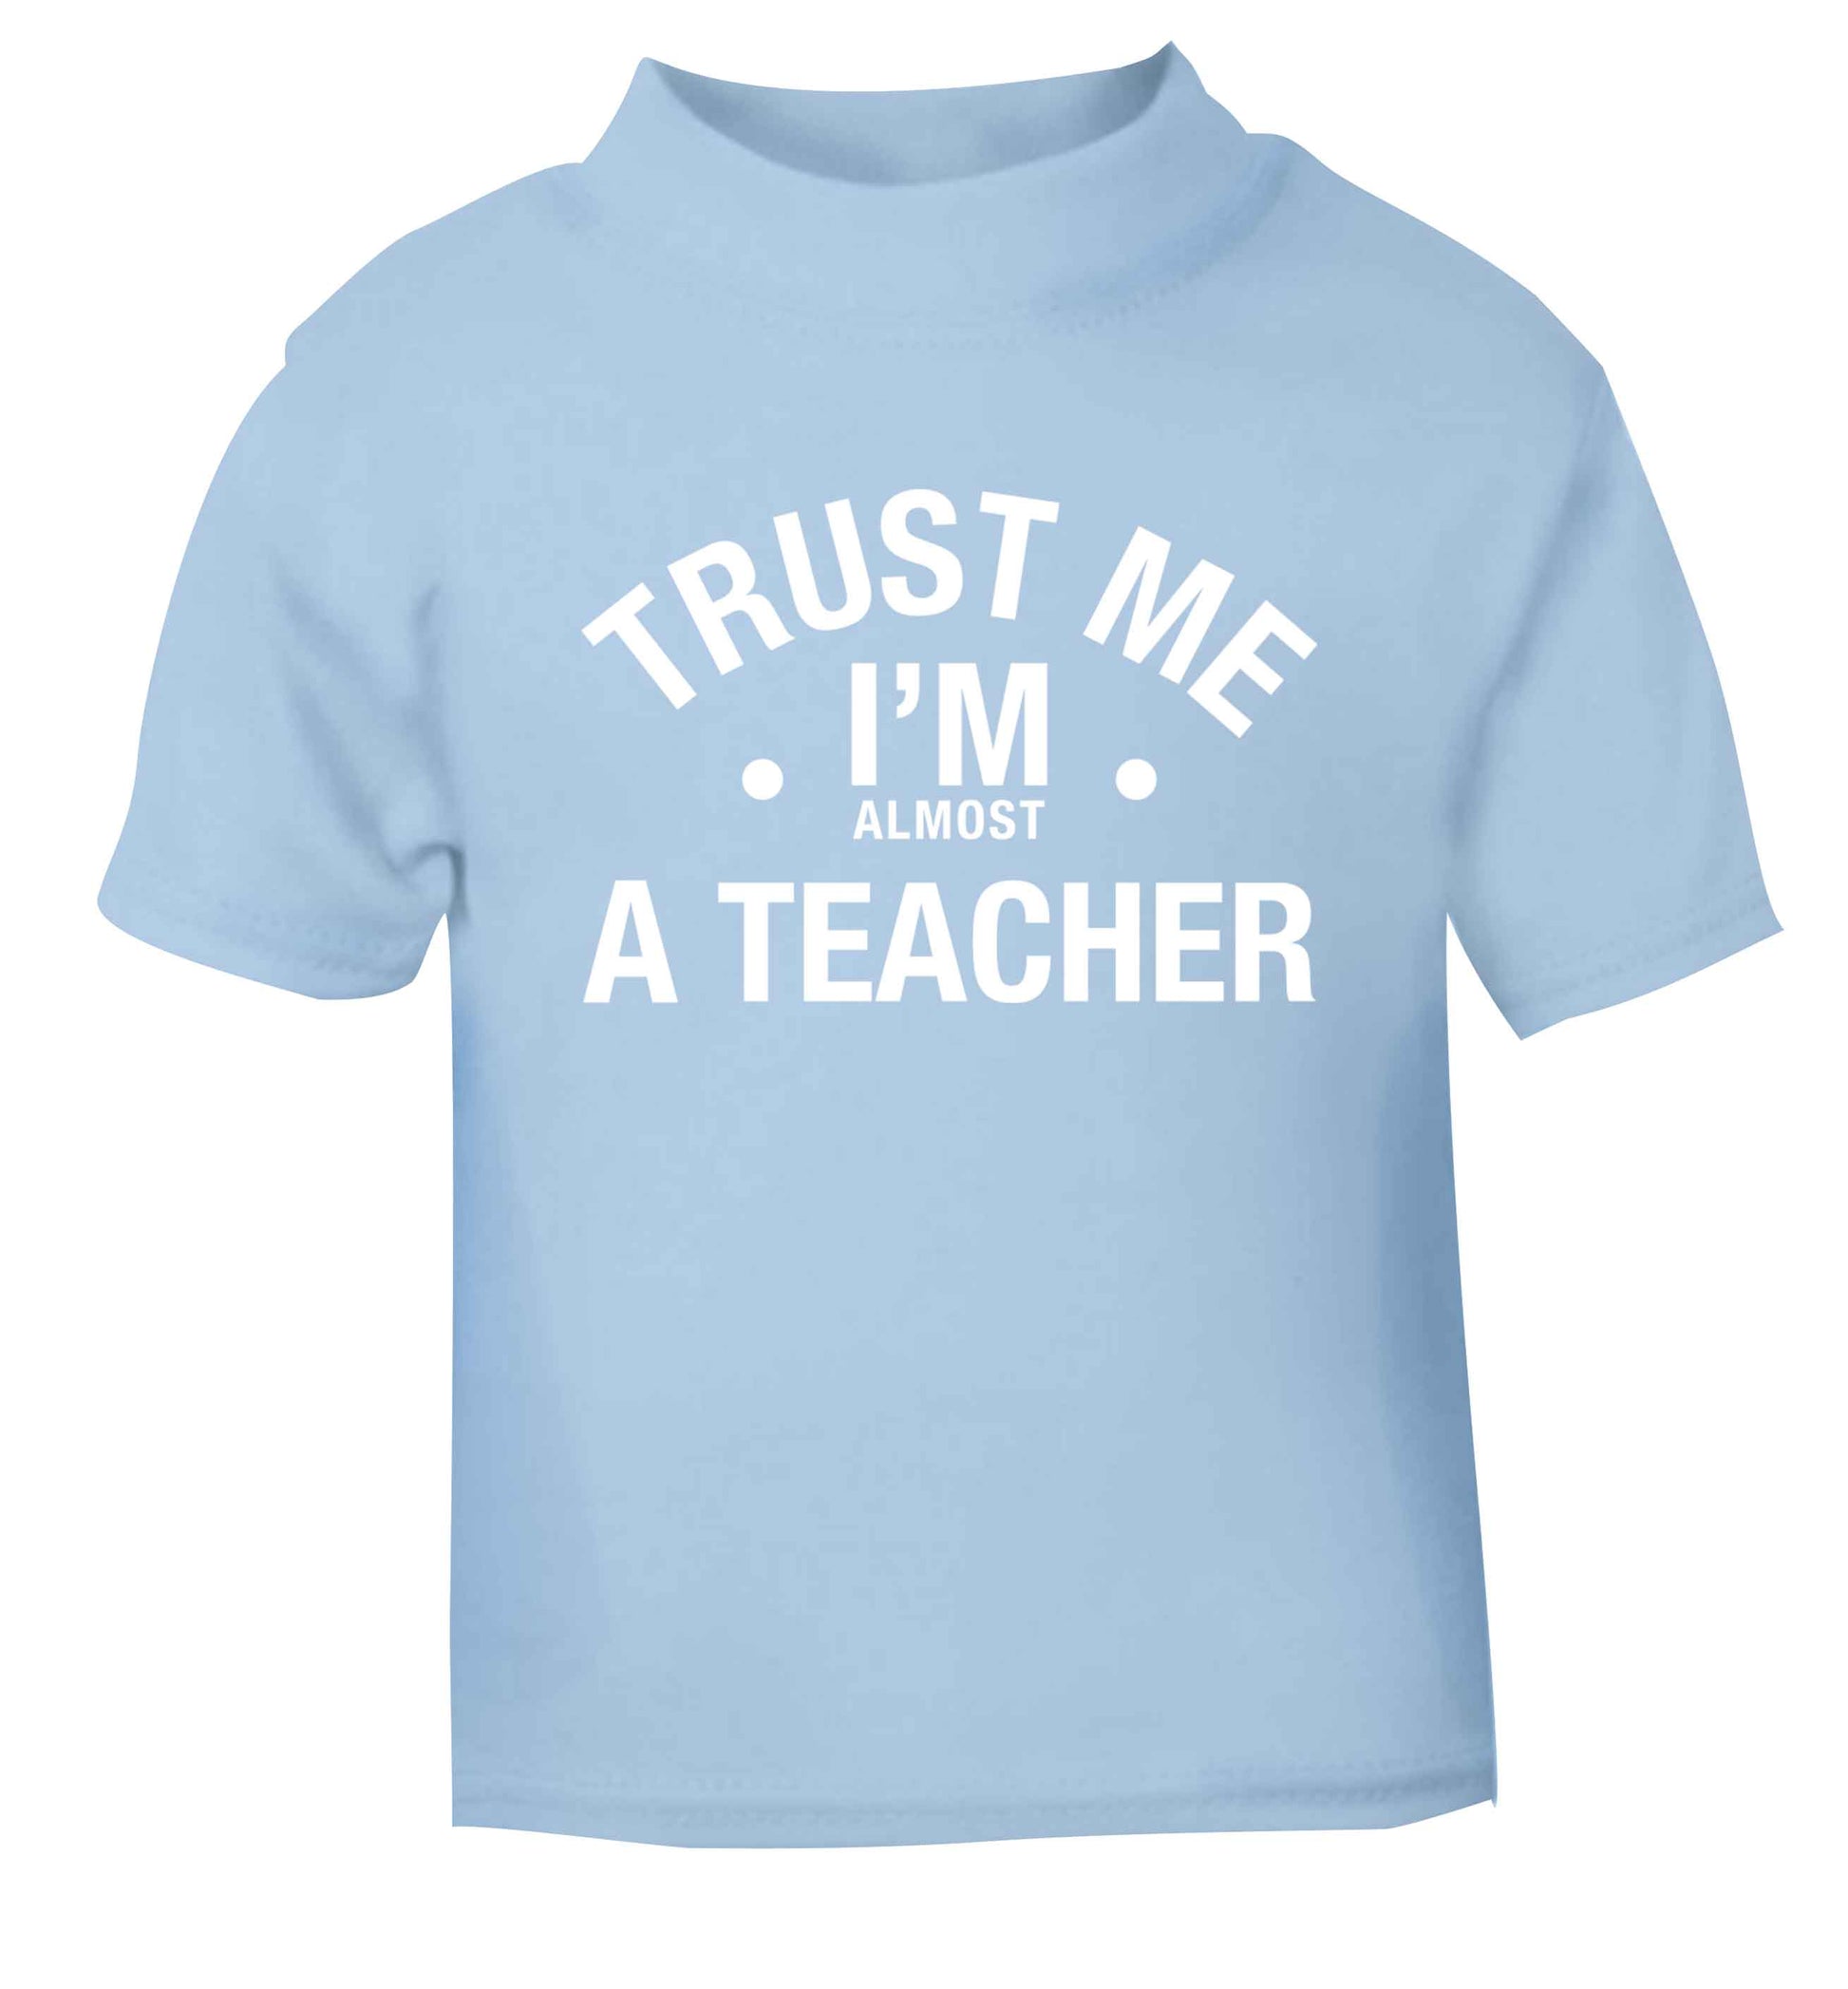 Trust me I'm almost a teacher light blue baby toddler Tshirt 2 Years